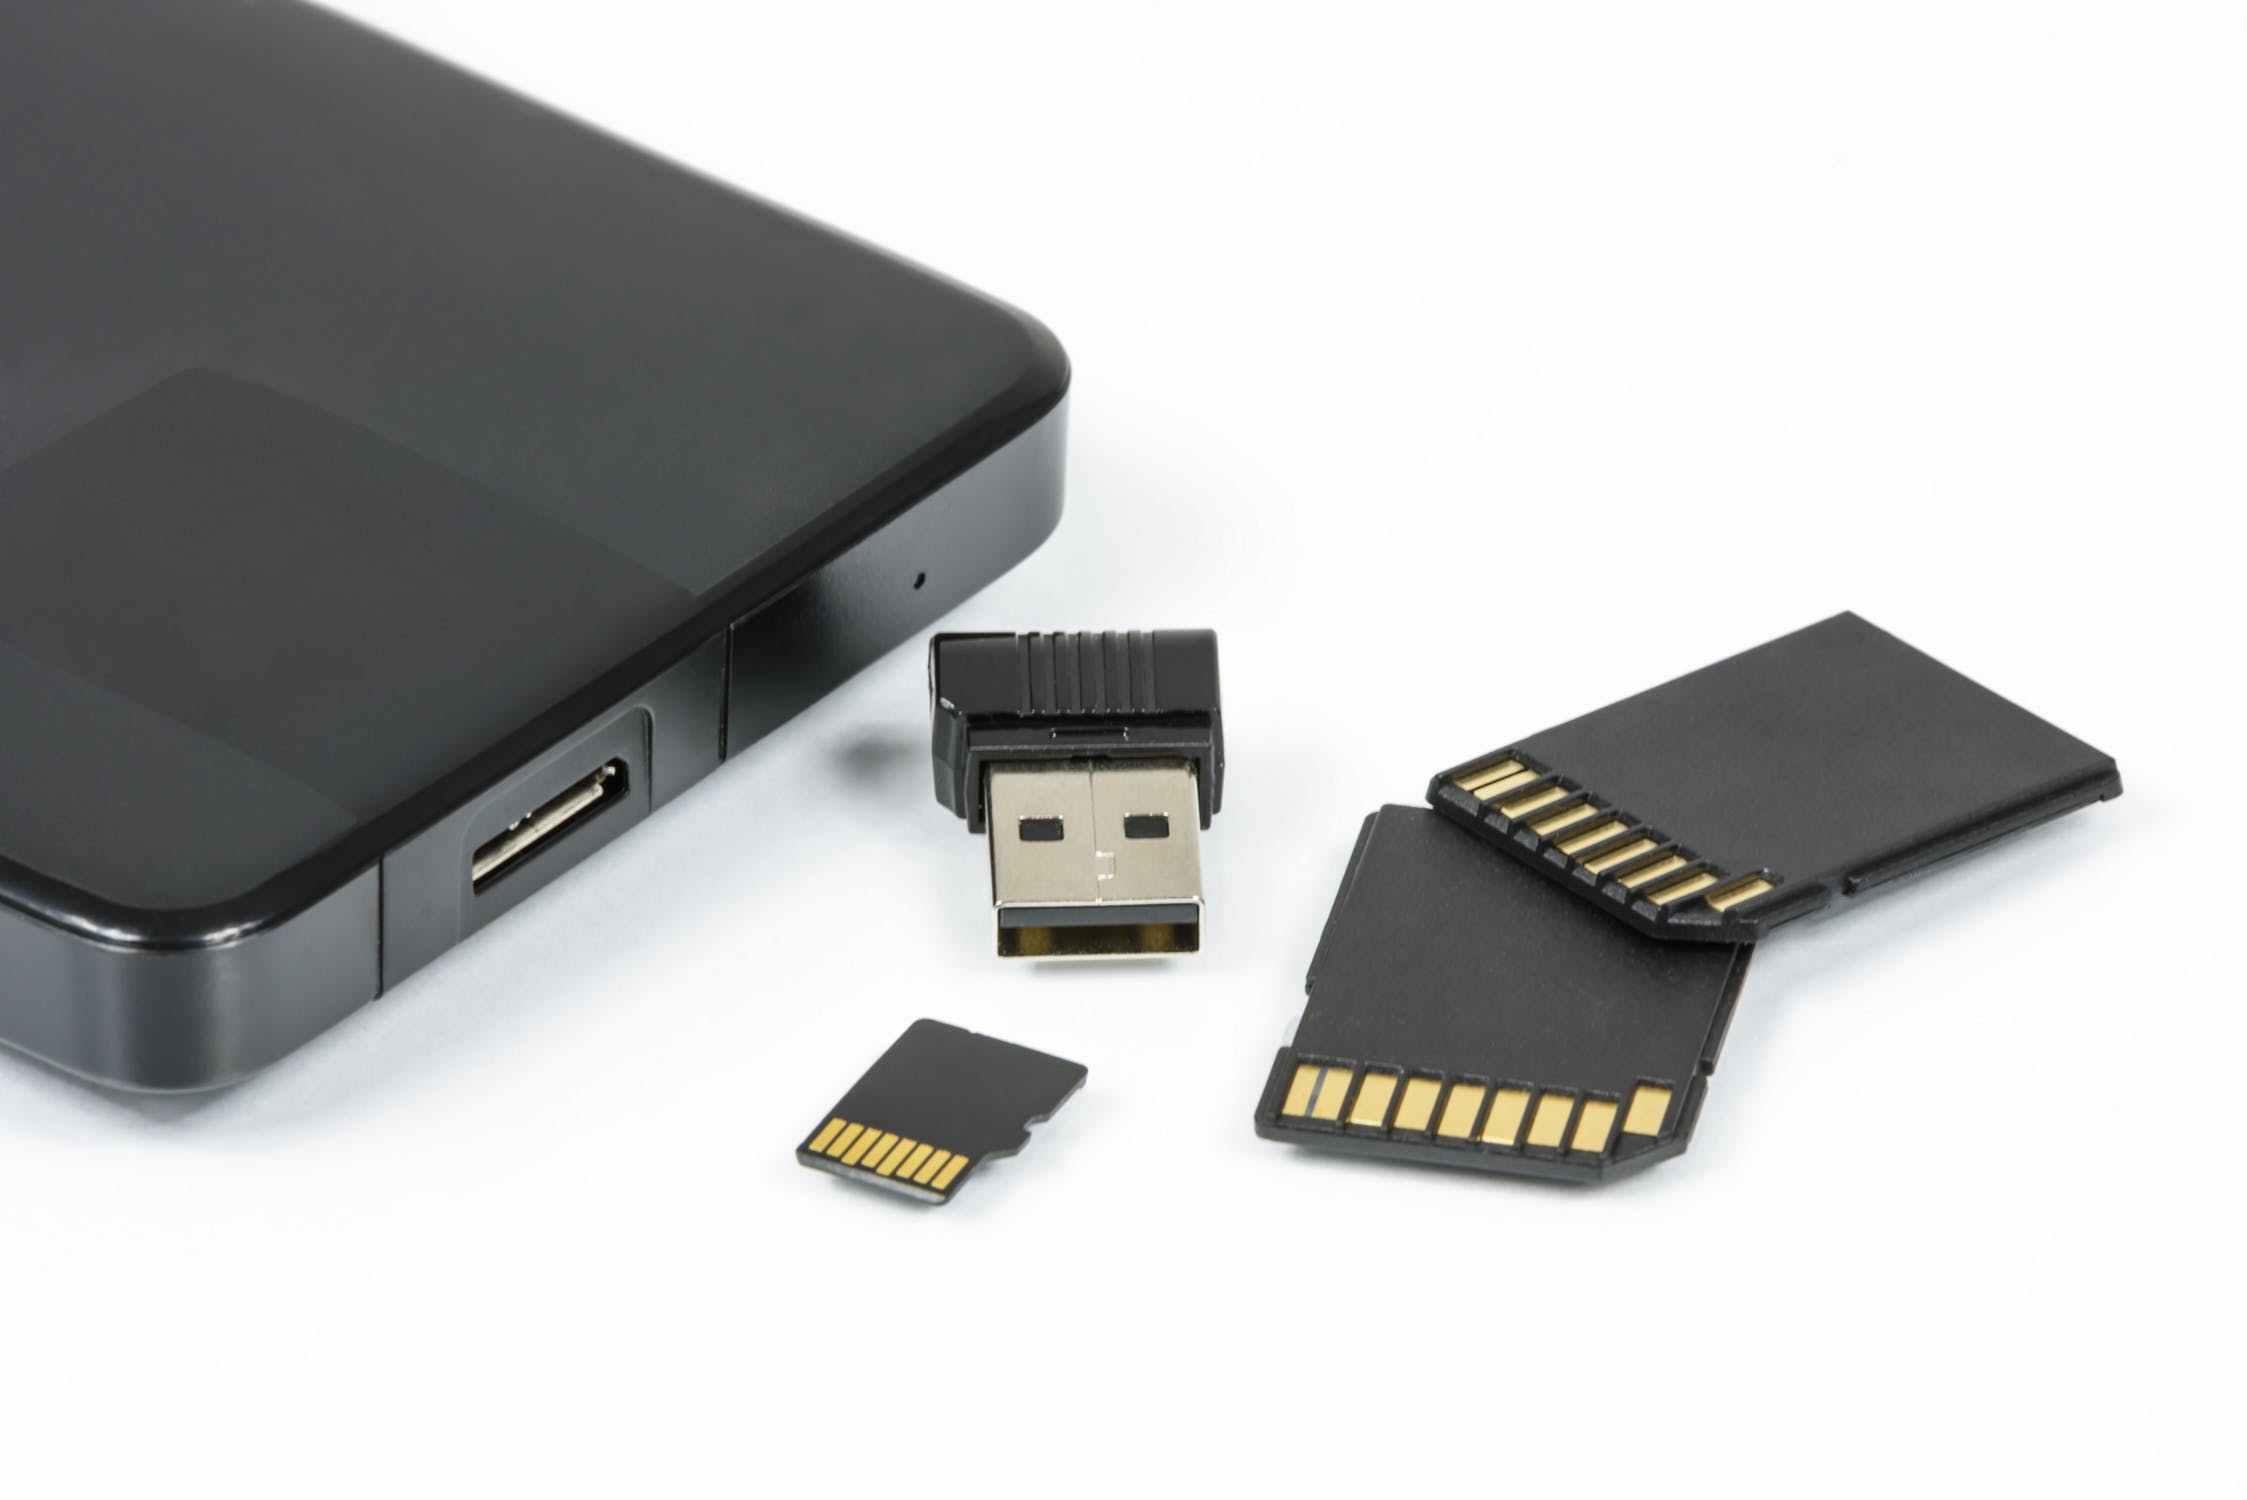 How Do You Know When An SD Card Is Failing?